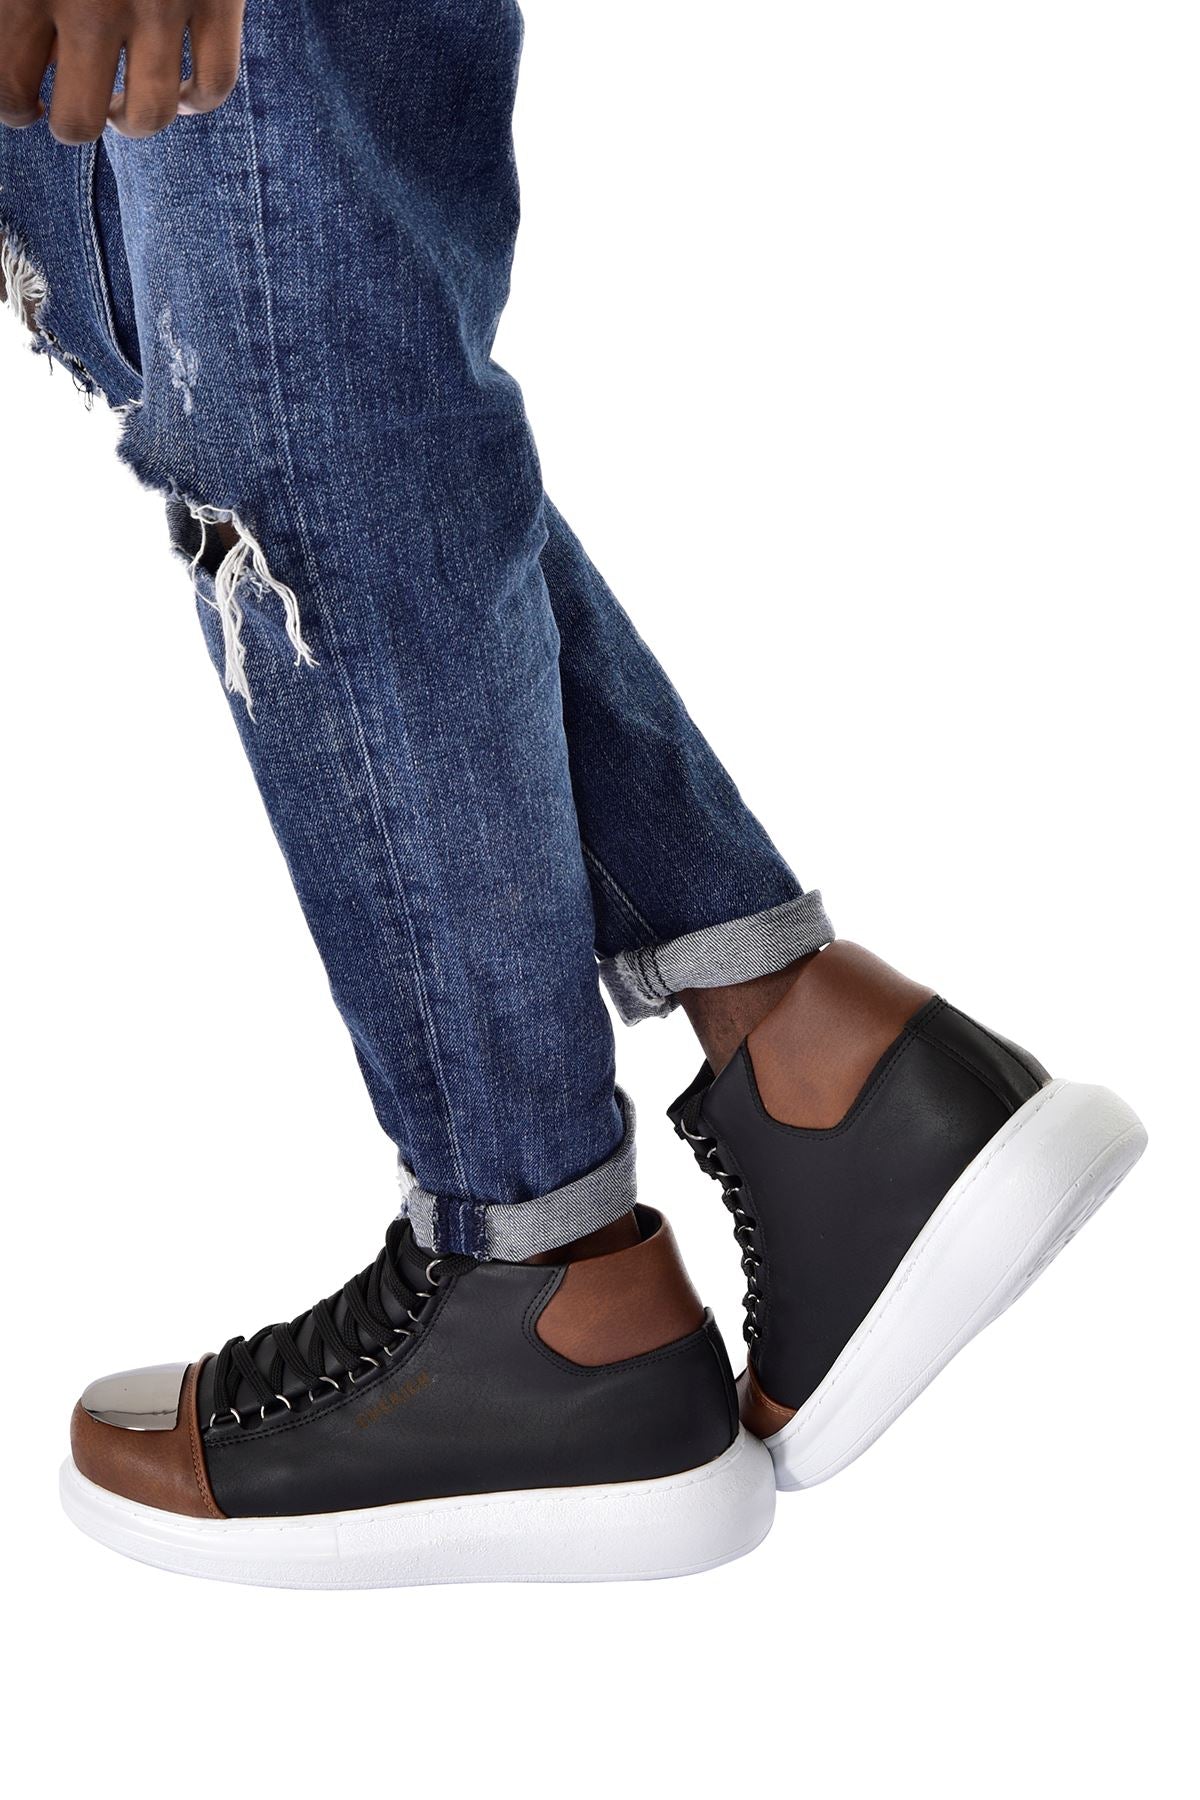 CH267 Men's shoes sneakers Boots BLACK/TANK - STREETMODE ™